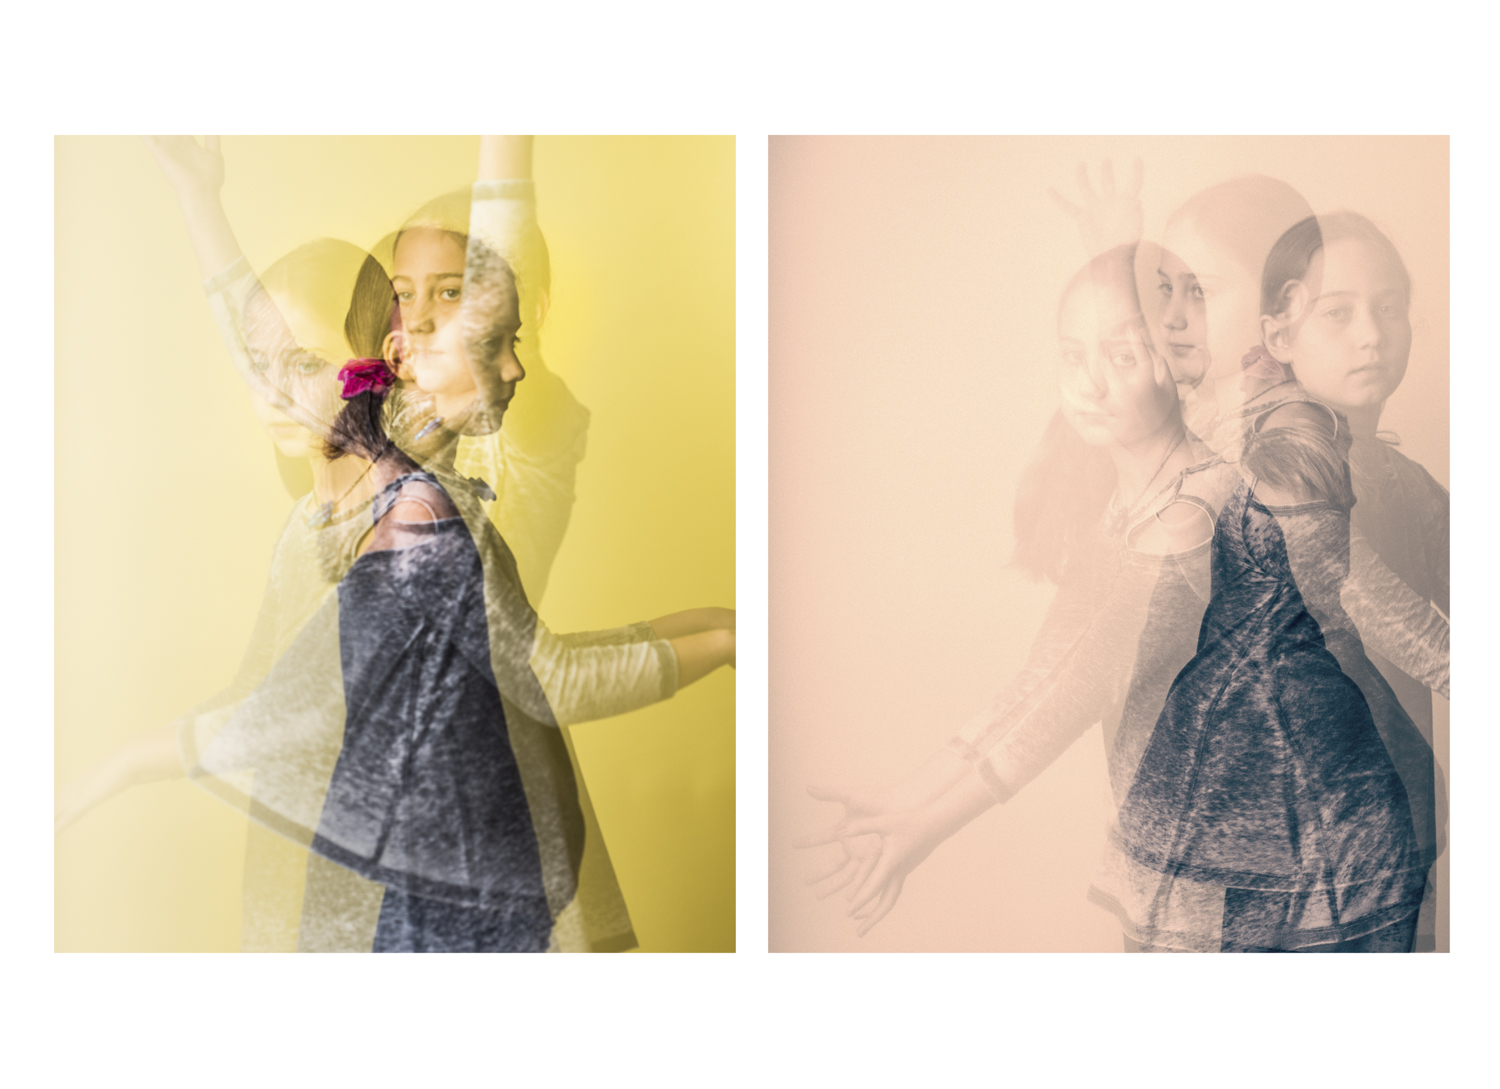 Senses in Animate Project, Diptych